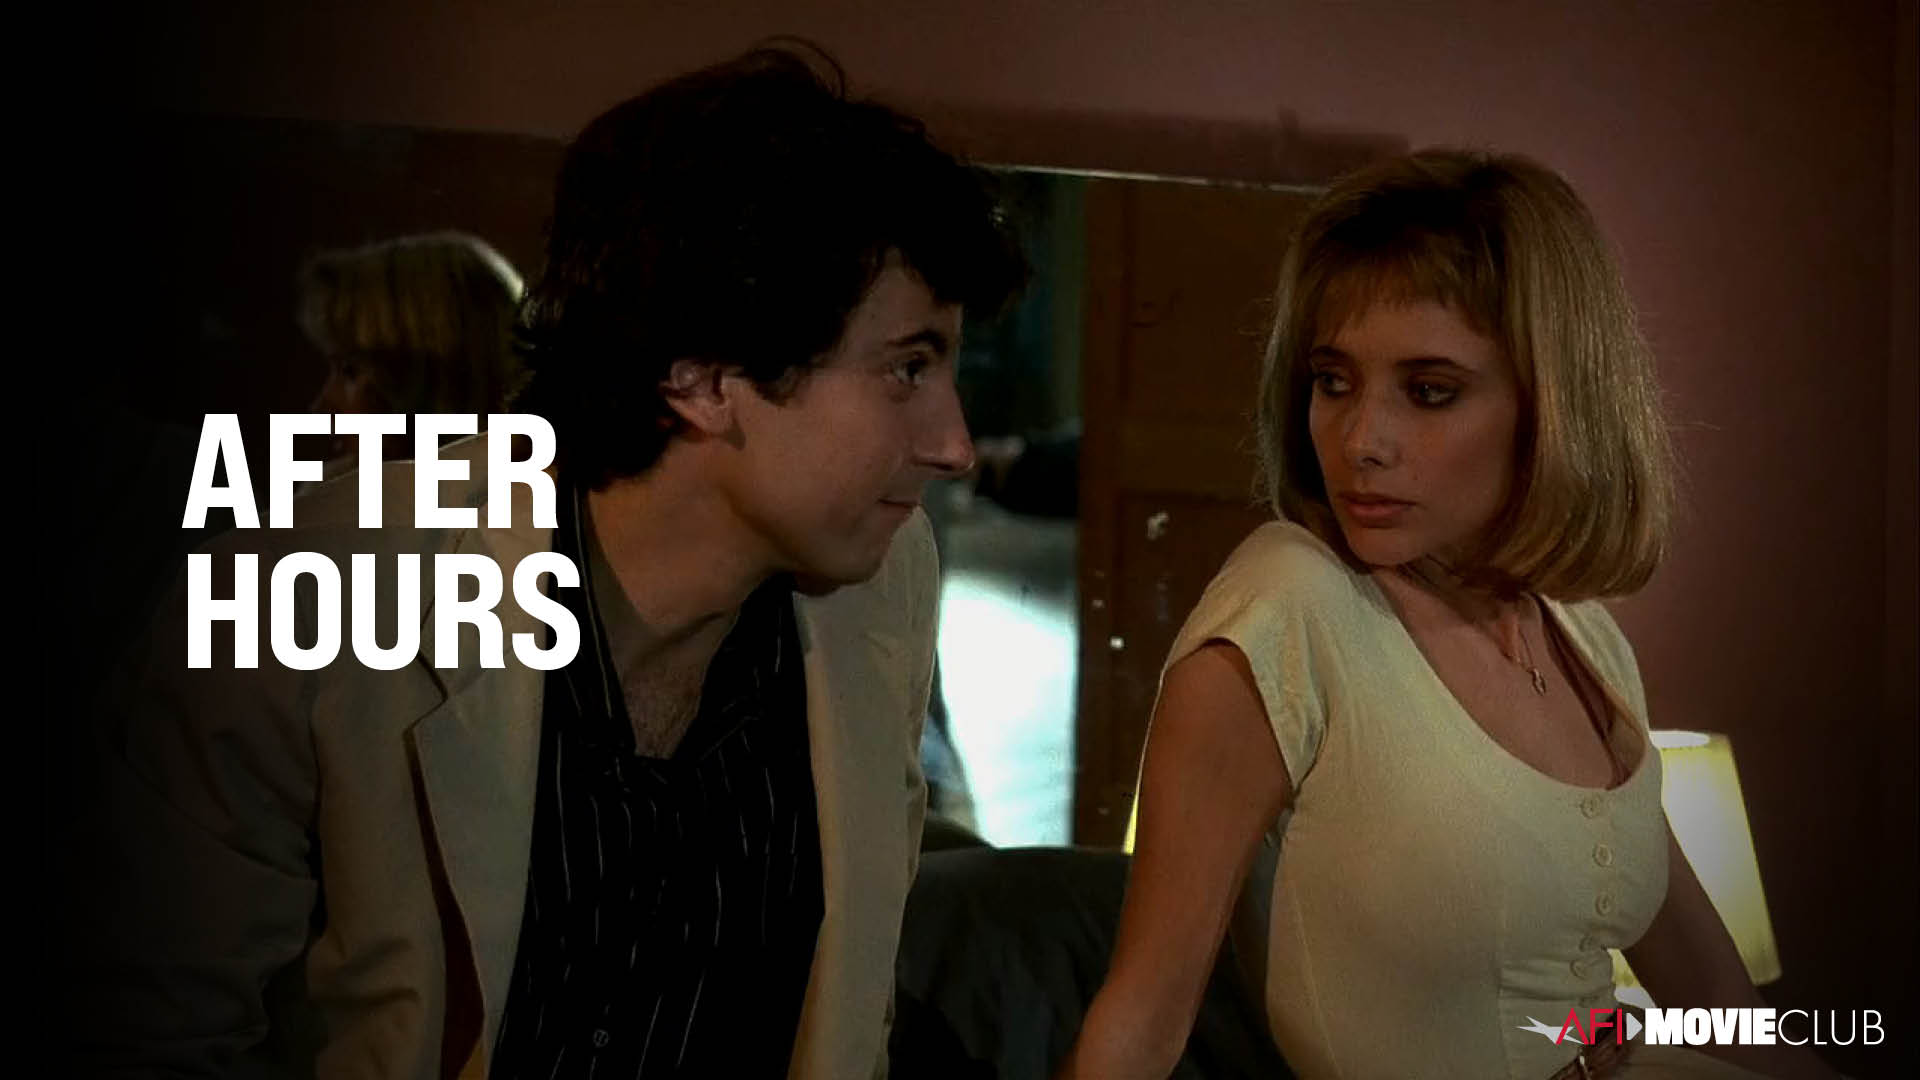 After Hours Film Still - Rosanna Arquette and Griffin Dunne